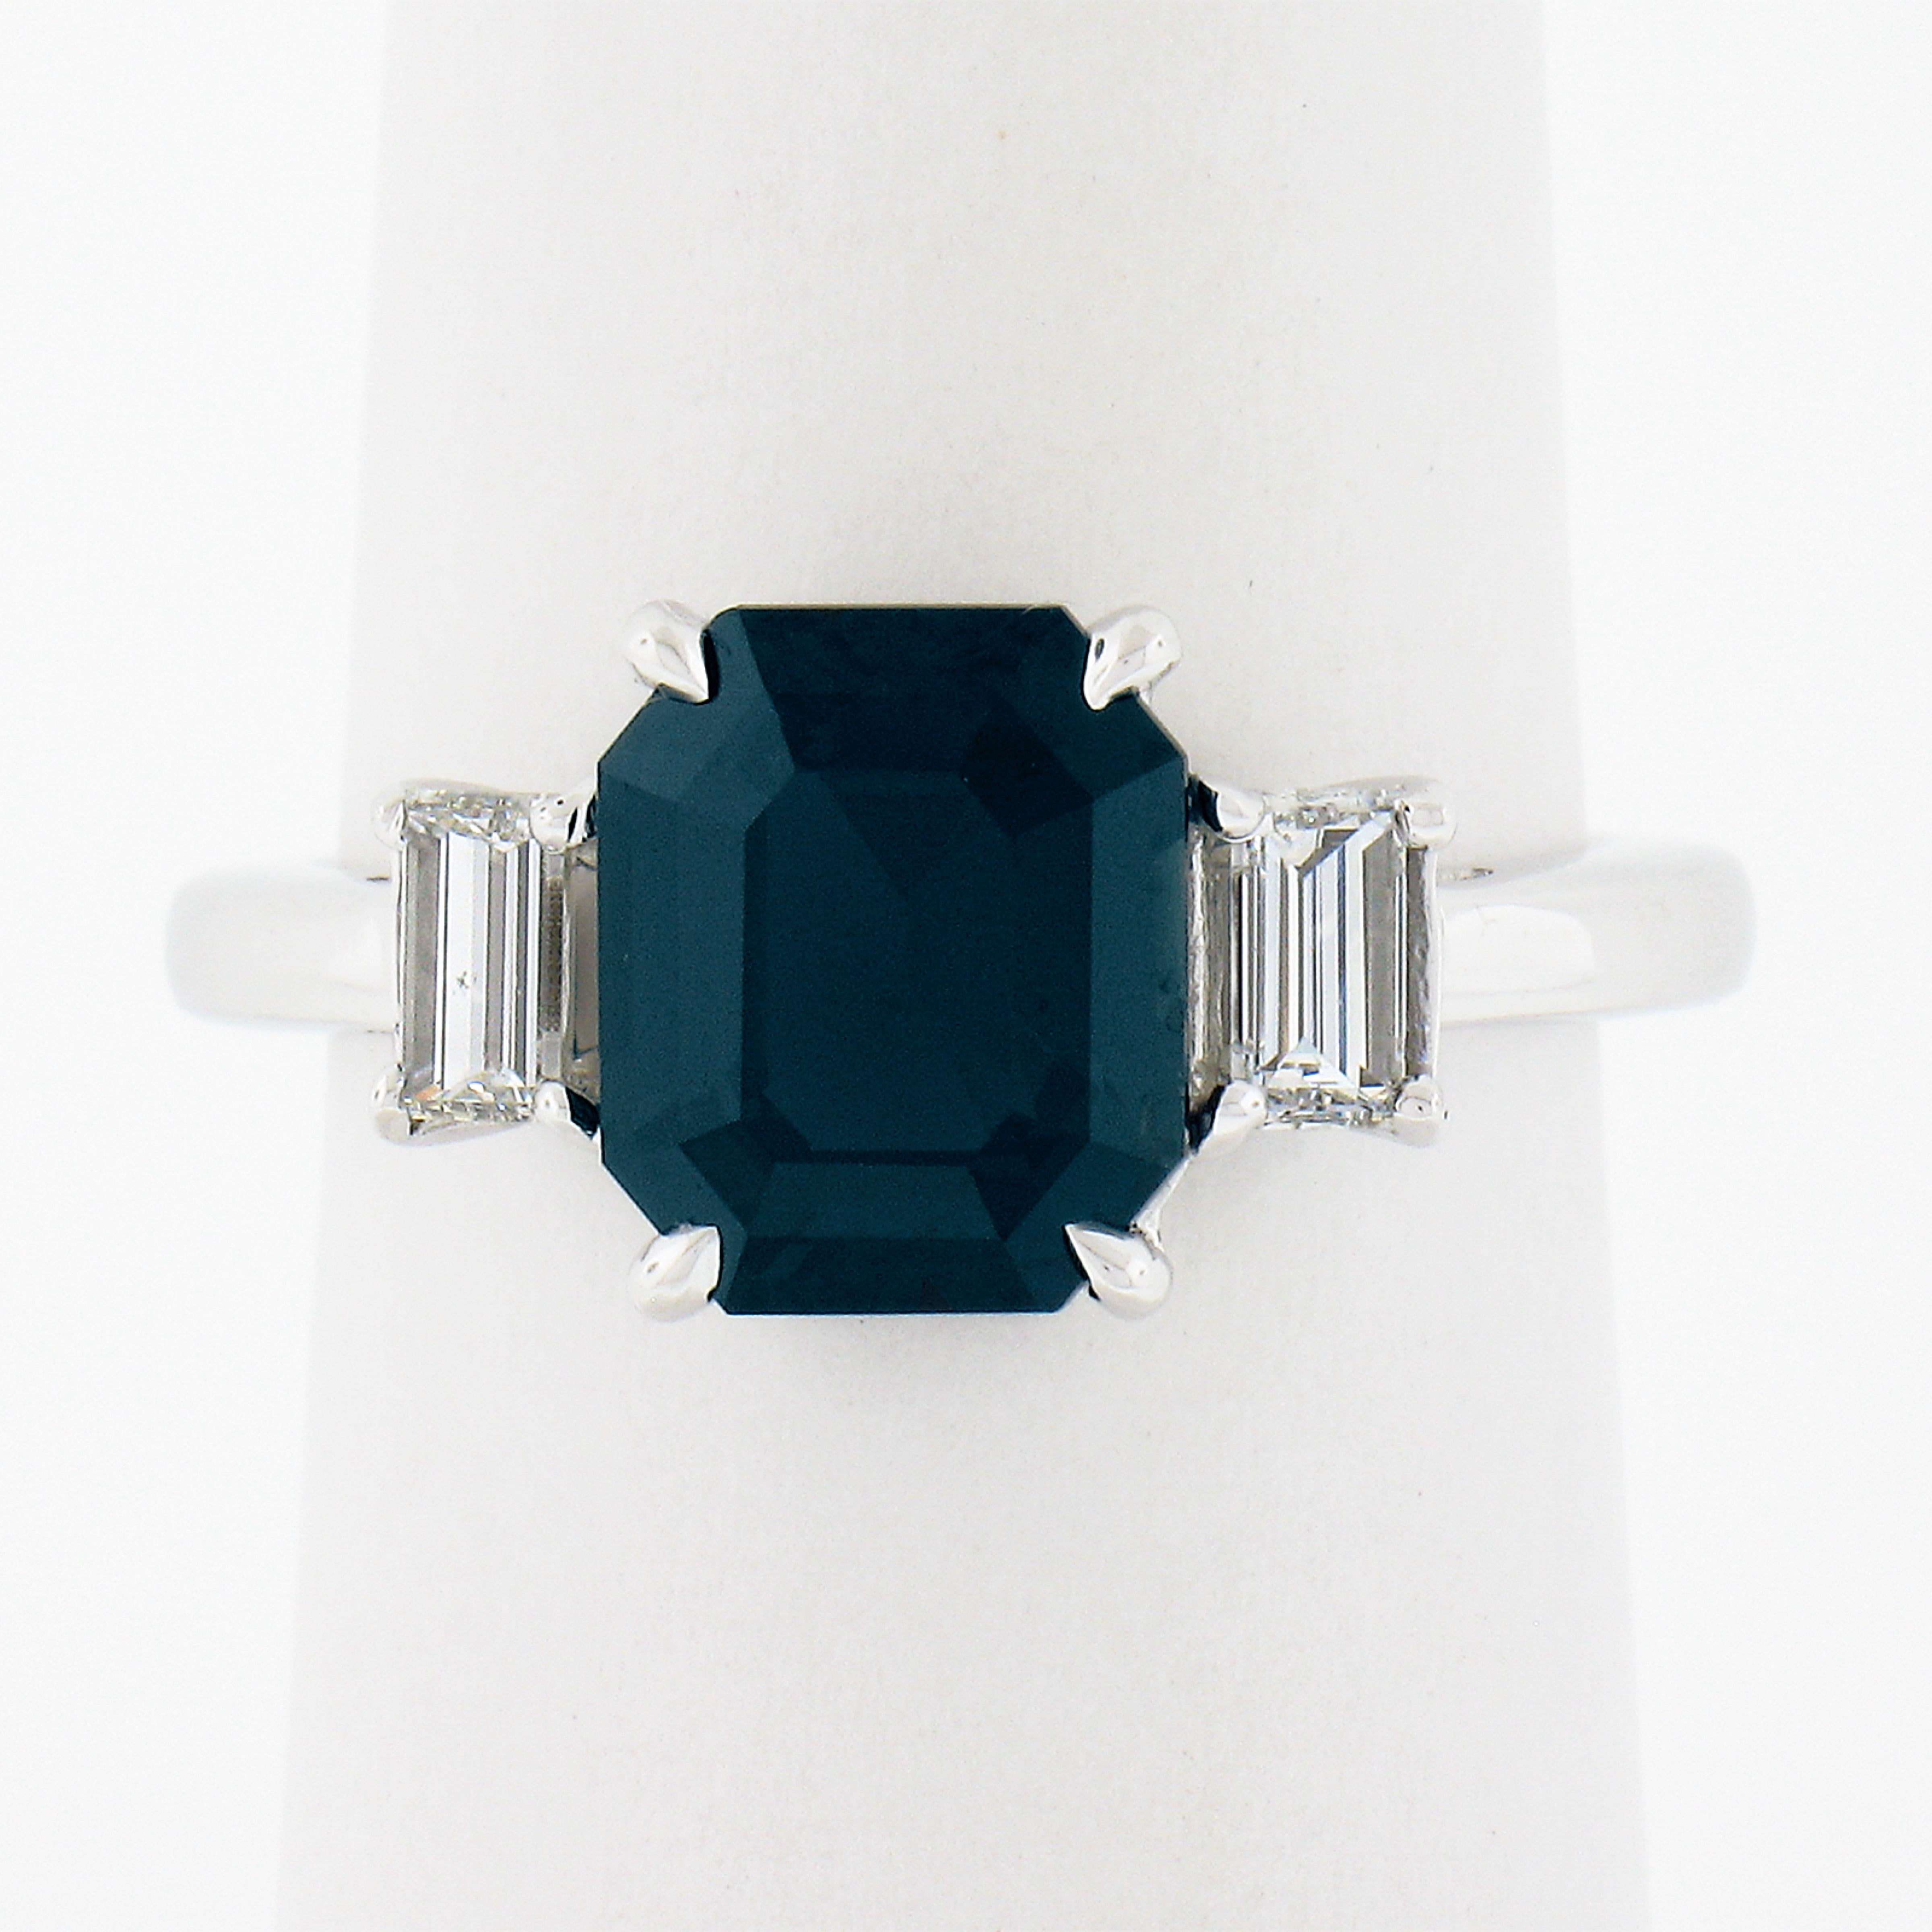 This classy and elegant sapphire engagement or three stone ring is crafted in solid platinum and features a GIA certified, 3.03 carat unique greenish blue sapphire solitaire, neatly prong set in the center and flanked on either side with a fine